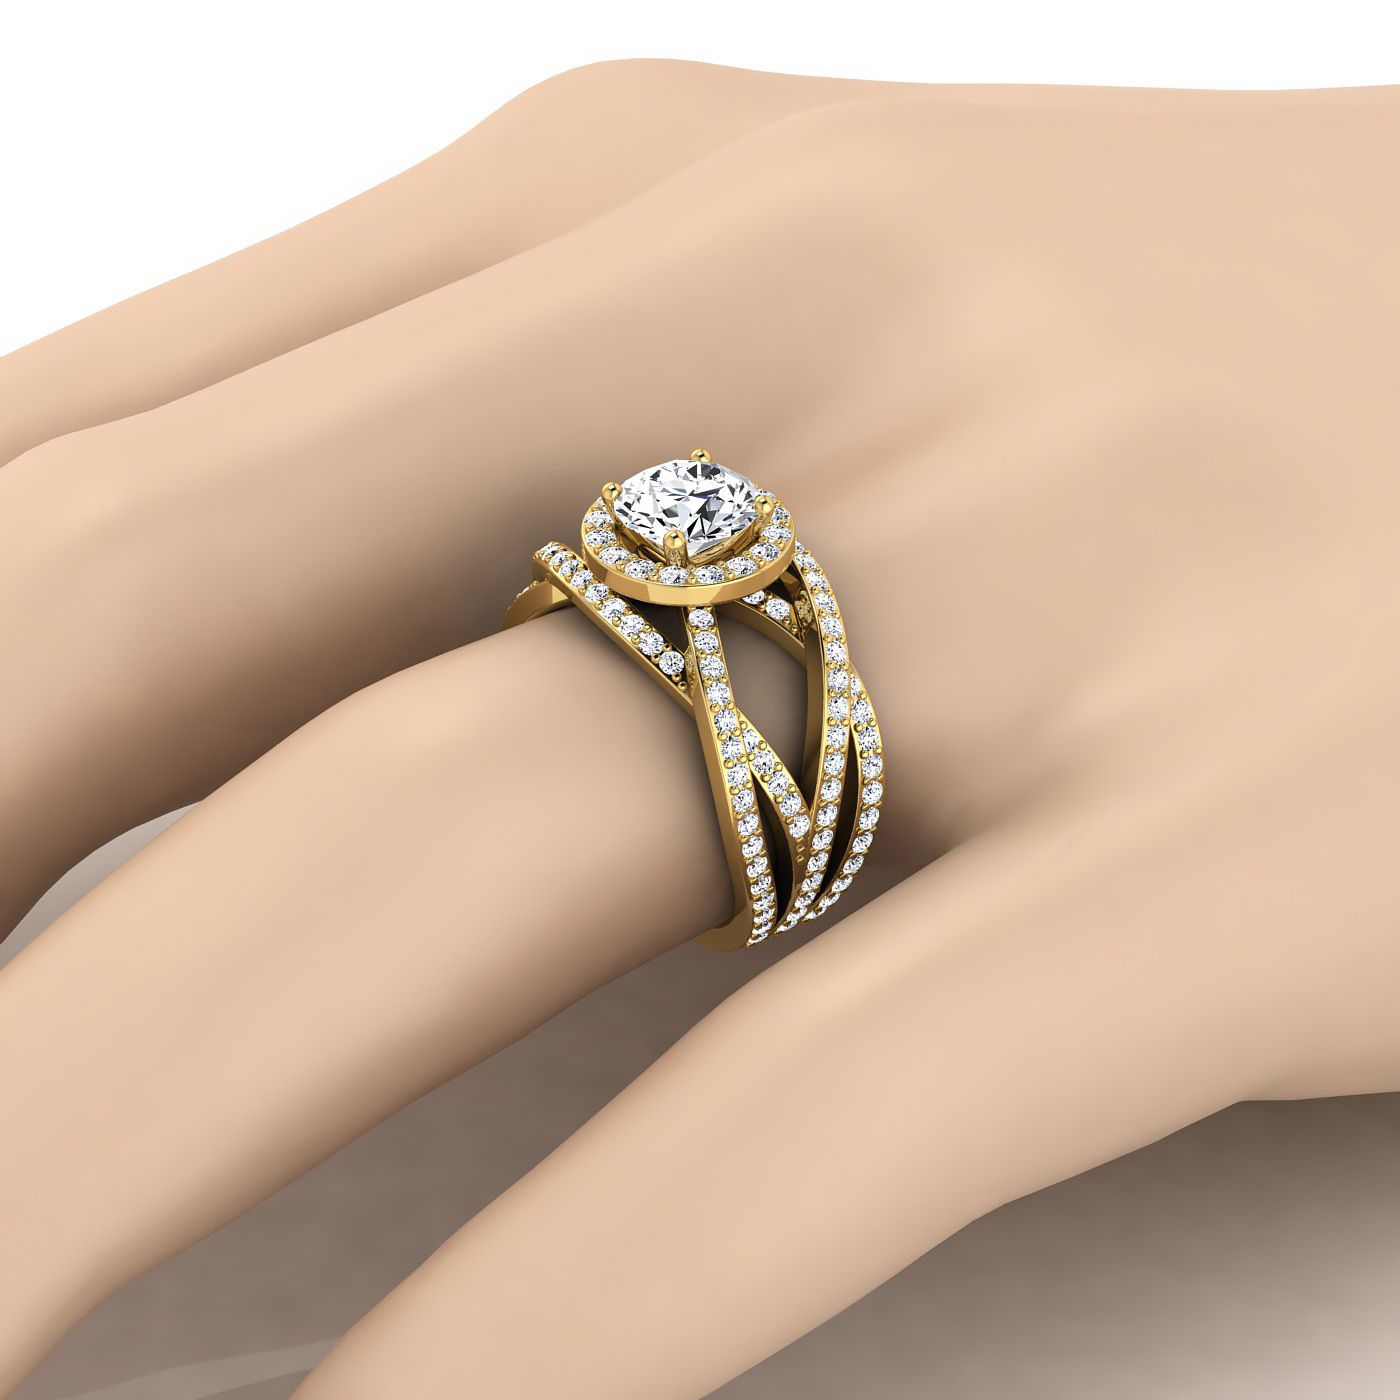 14K Yellow Gold Round Brilliant Unique Open Intertwined Diamond Pave Row Engagement Ring -1ctw